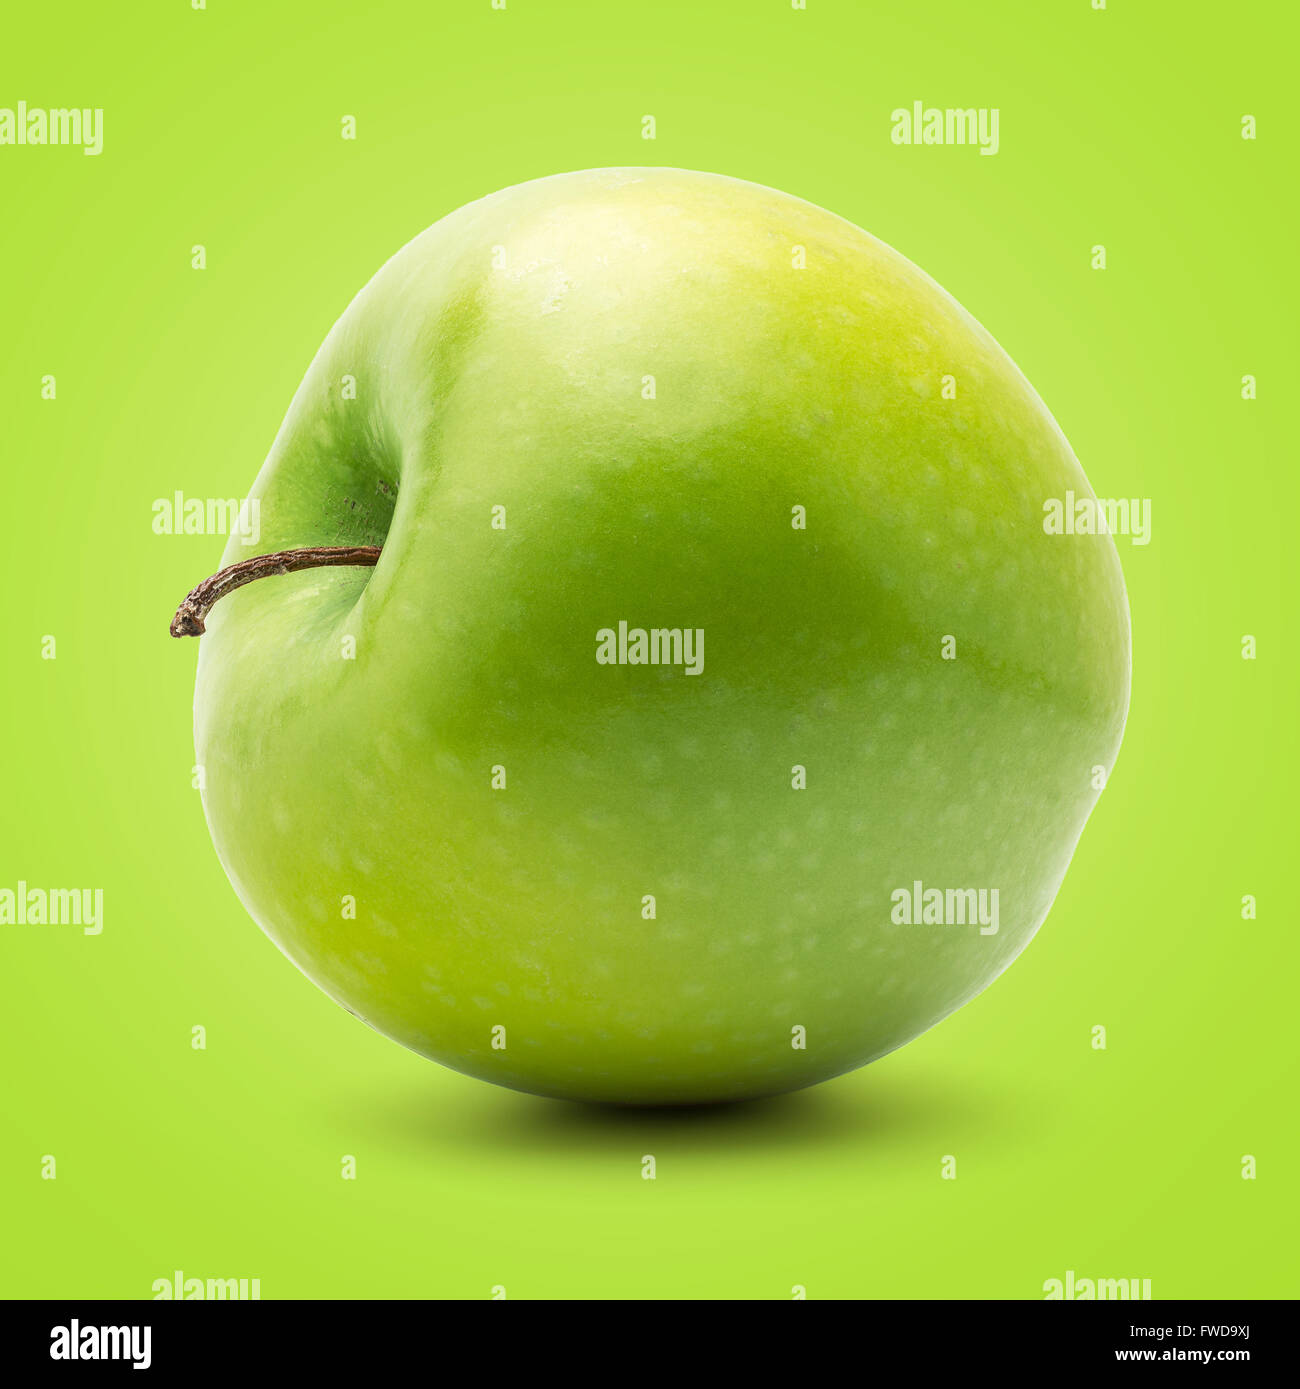 https://c8.alamy.com/comp/FWD9XJ/perfect-fresh-green-apple-isolated-on-green-background-in-full-depth-FWD9XJ.jpg